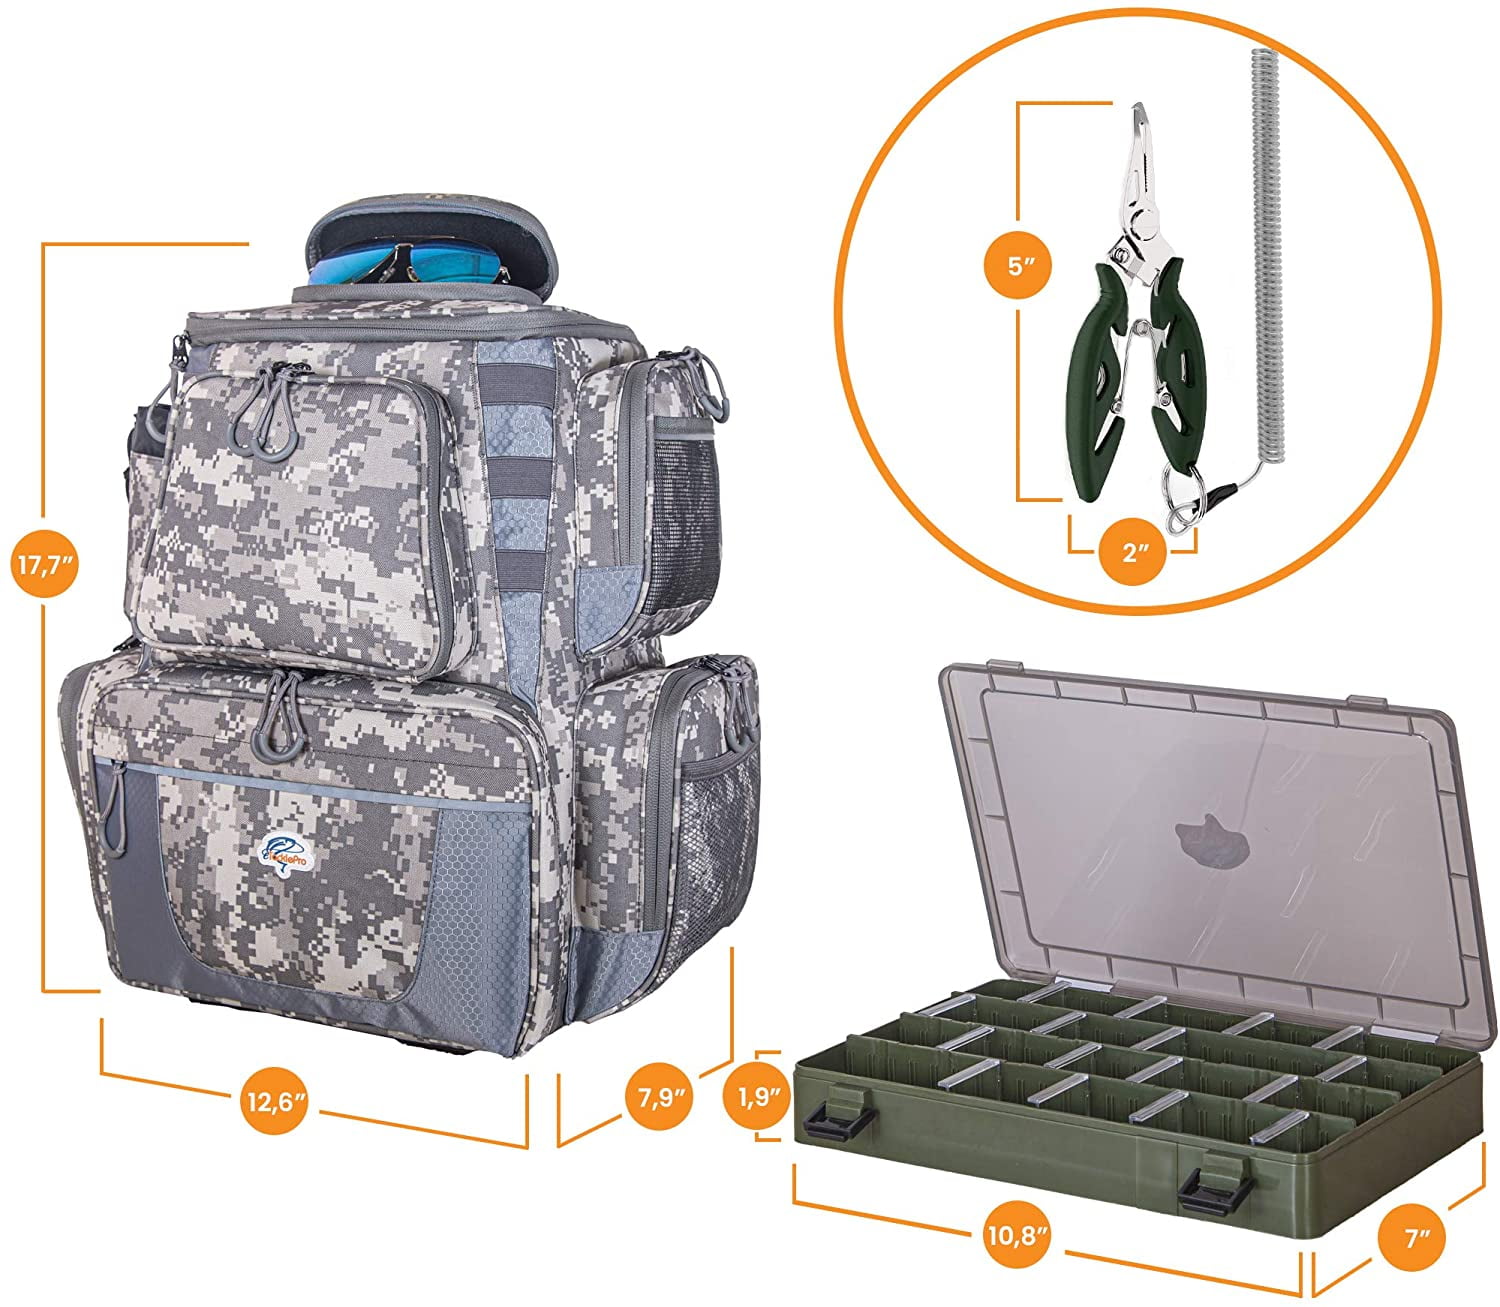 etacklepro Fishing Backpack Waterproof Tackle Bag with Protective Rain  Cover Includes 4 Tackle Boxes Stainless Steel Fishing Pliers and Lanyard -  Digital Camo 